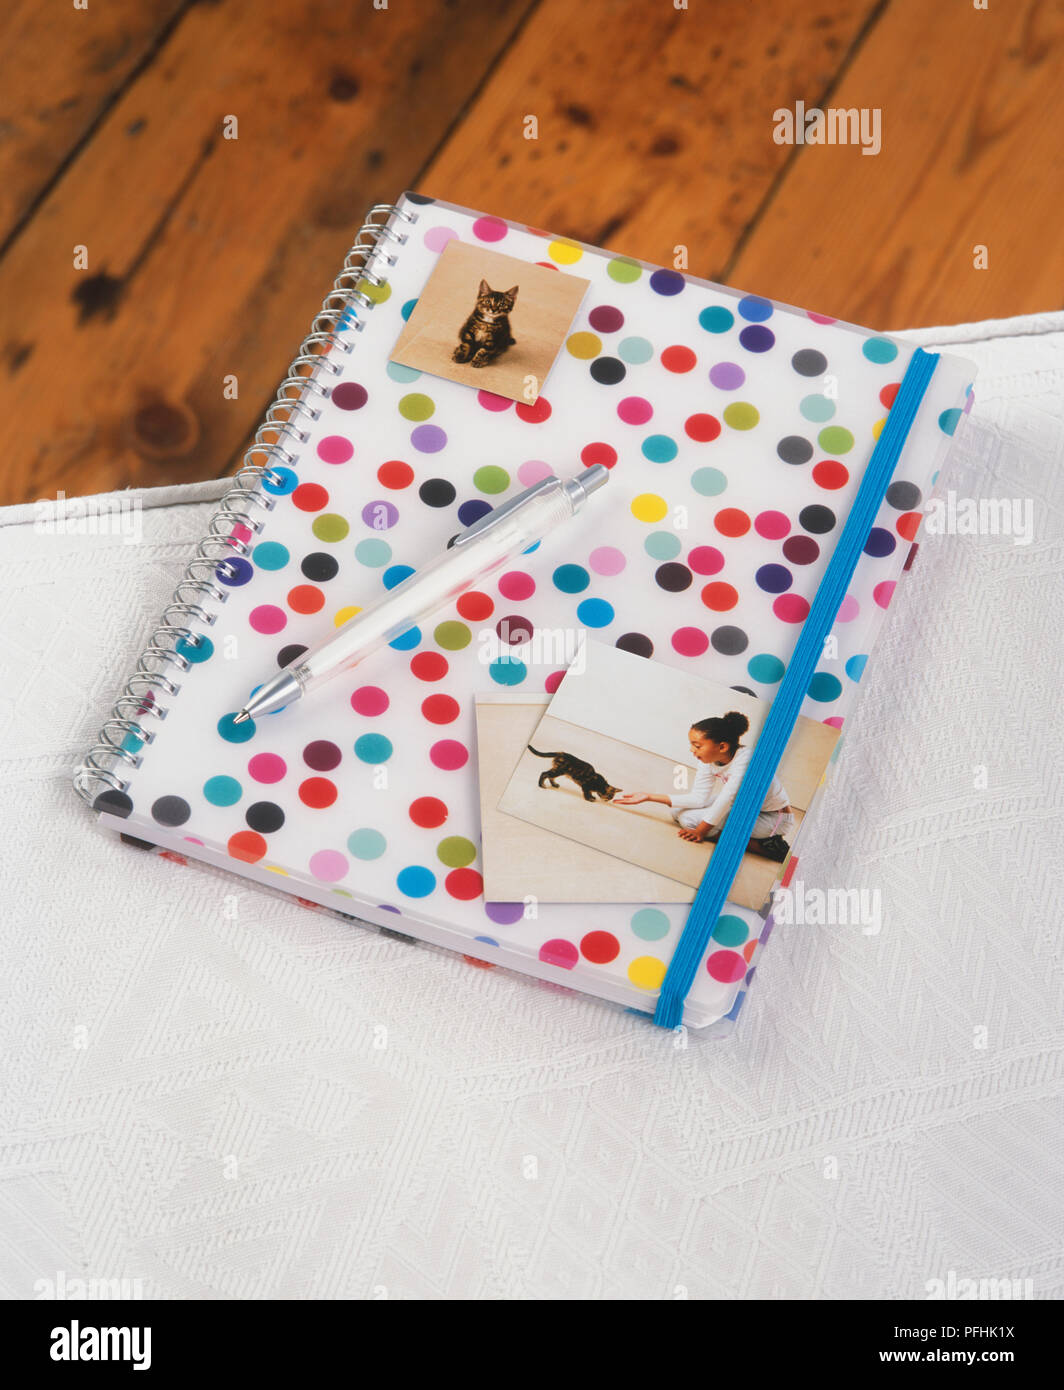 Ring bound journal with spotted patterned cover and elastic strap, photographs of girl and kitten, pen, view from above. Stock Photo